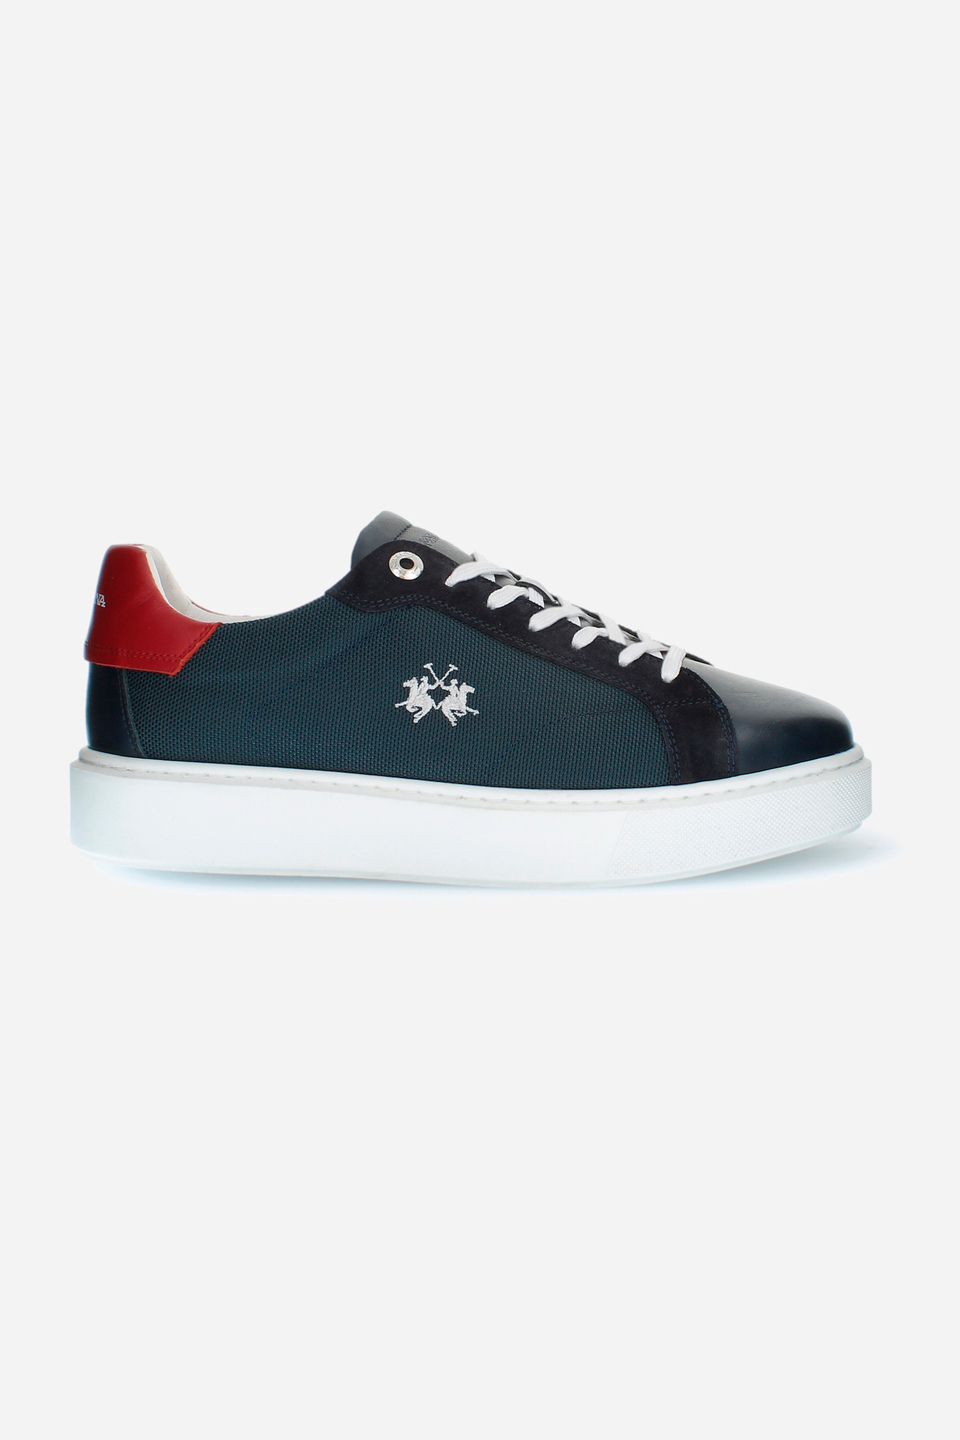 Men's trainers in leather and suede | La Martina - Official Online Shop